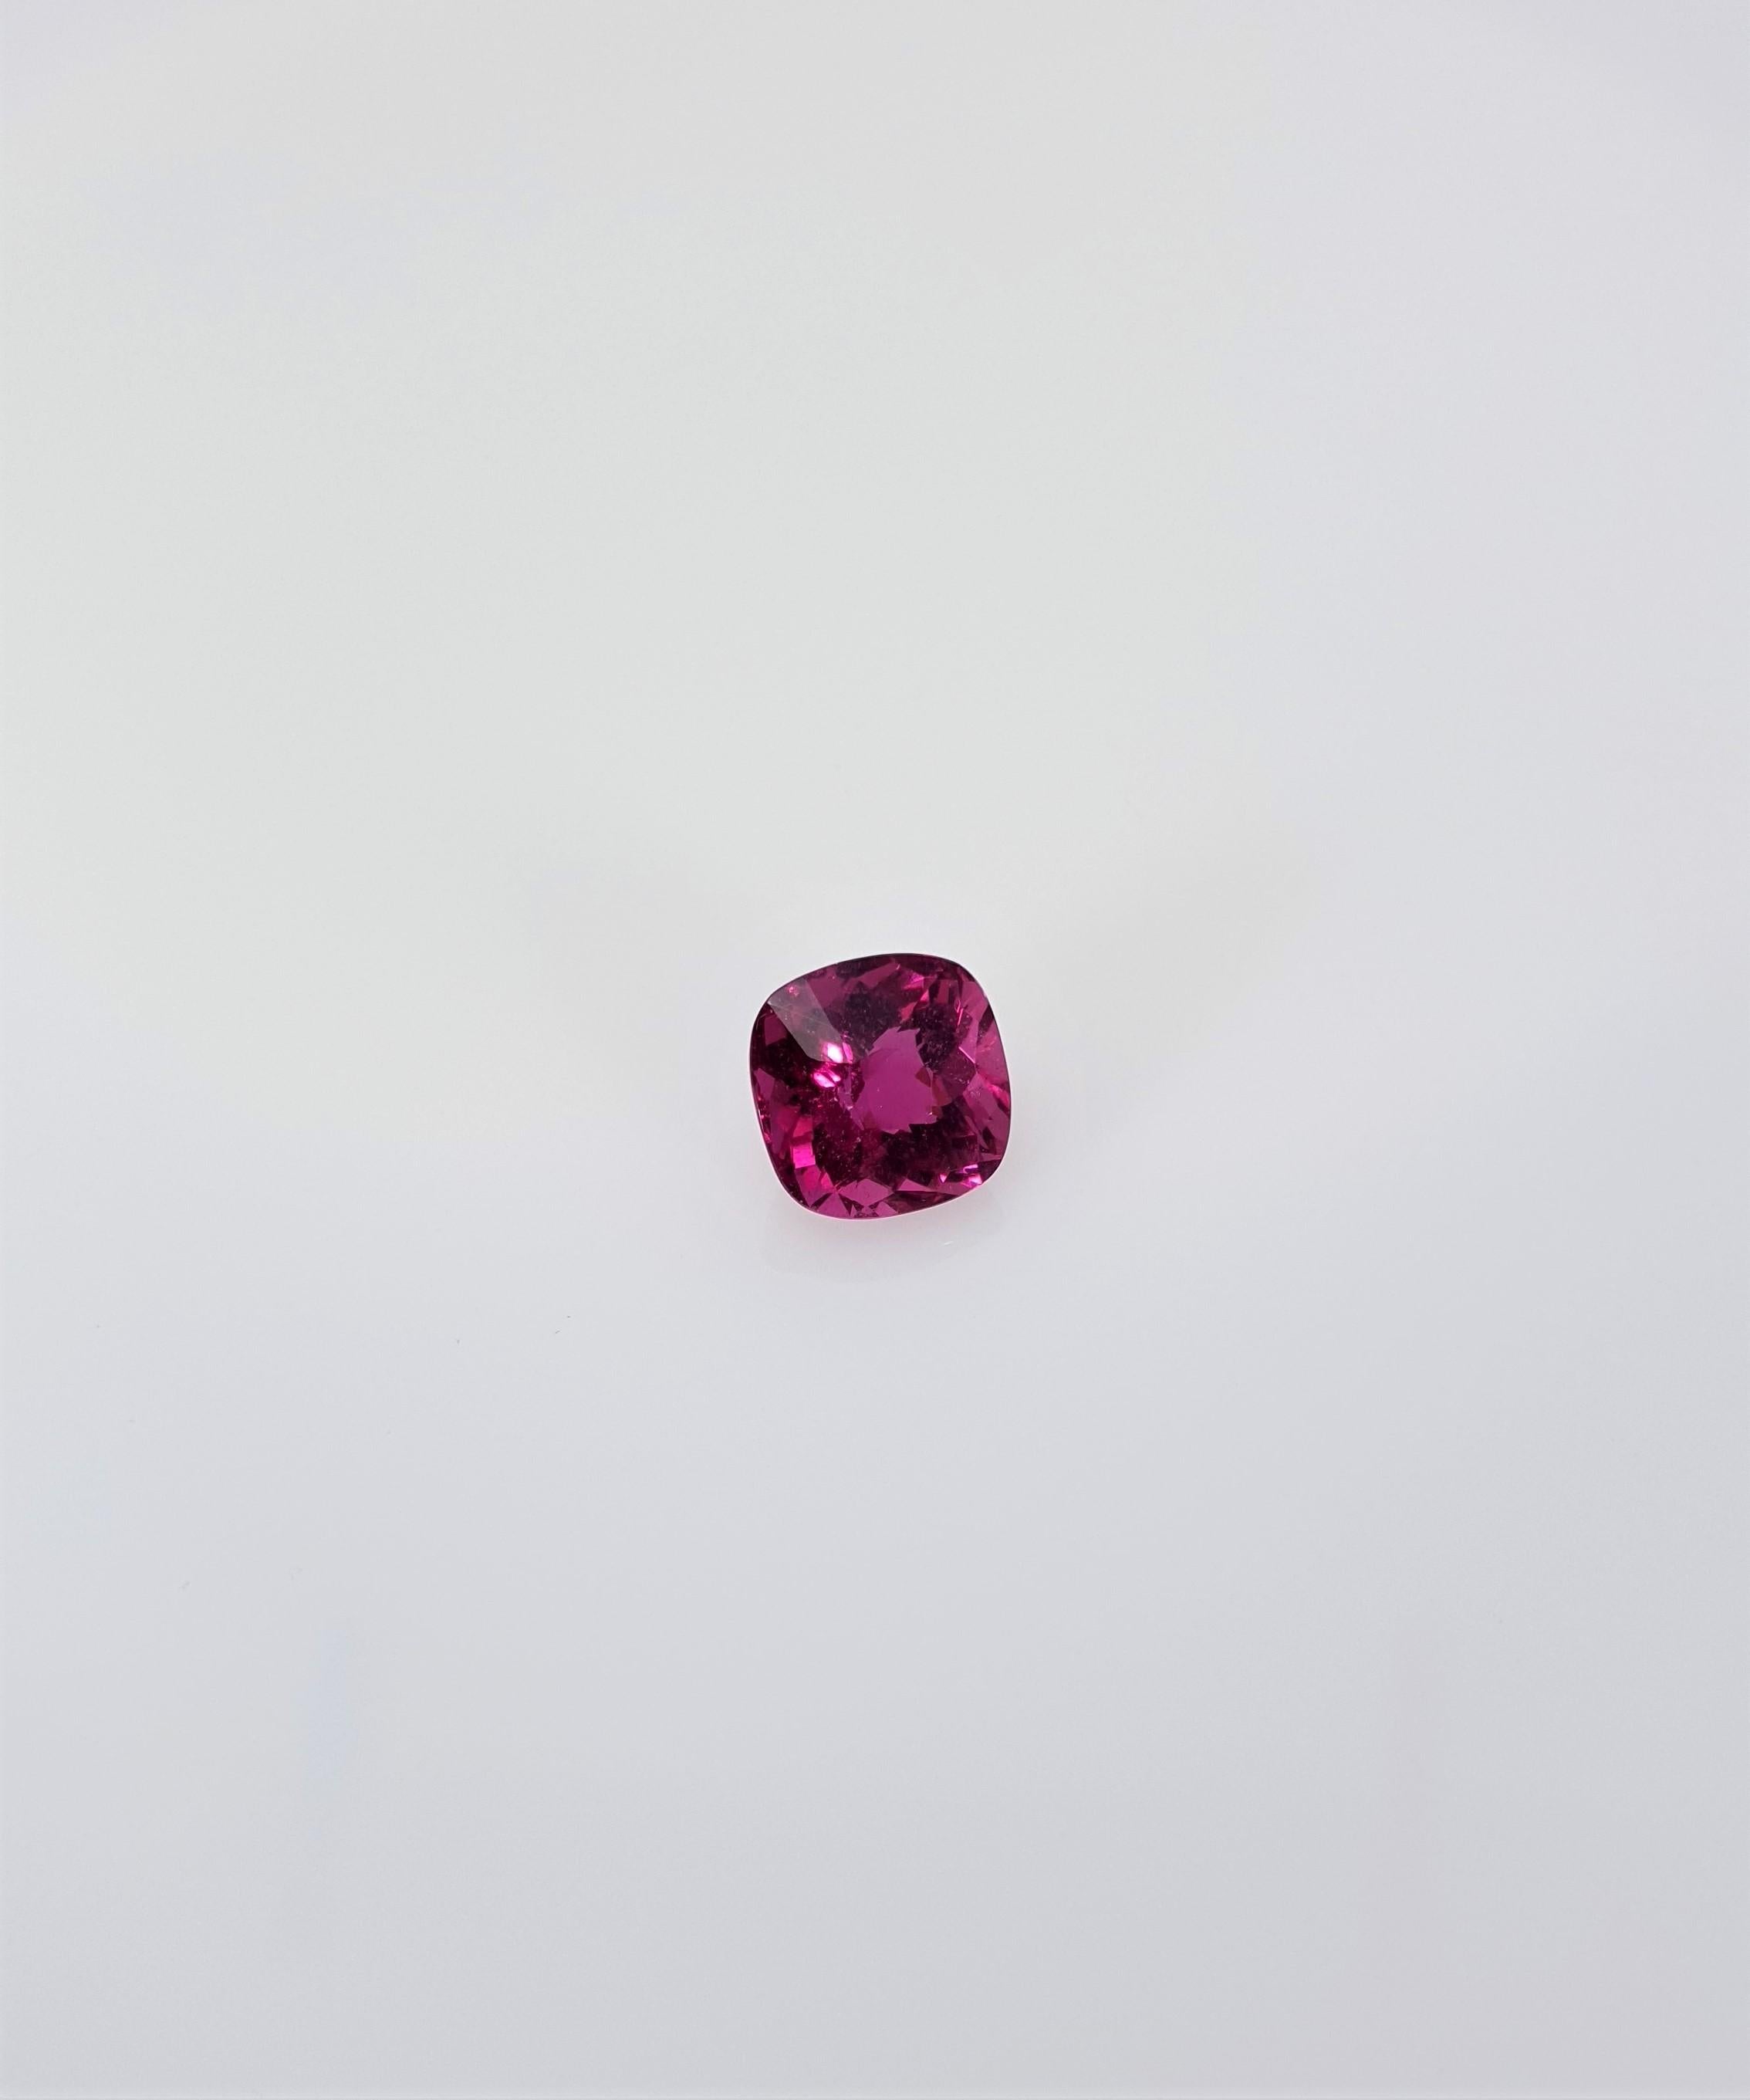 We are delighted to be able to offer, this 9,74 ct. violet pink Rubelite from our collection.
This beautiful gem has a intense violet pink color and a great fire. Cutting and proportion enable an very high light return from every angle!
The stone